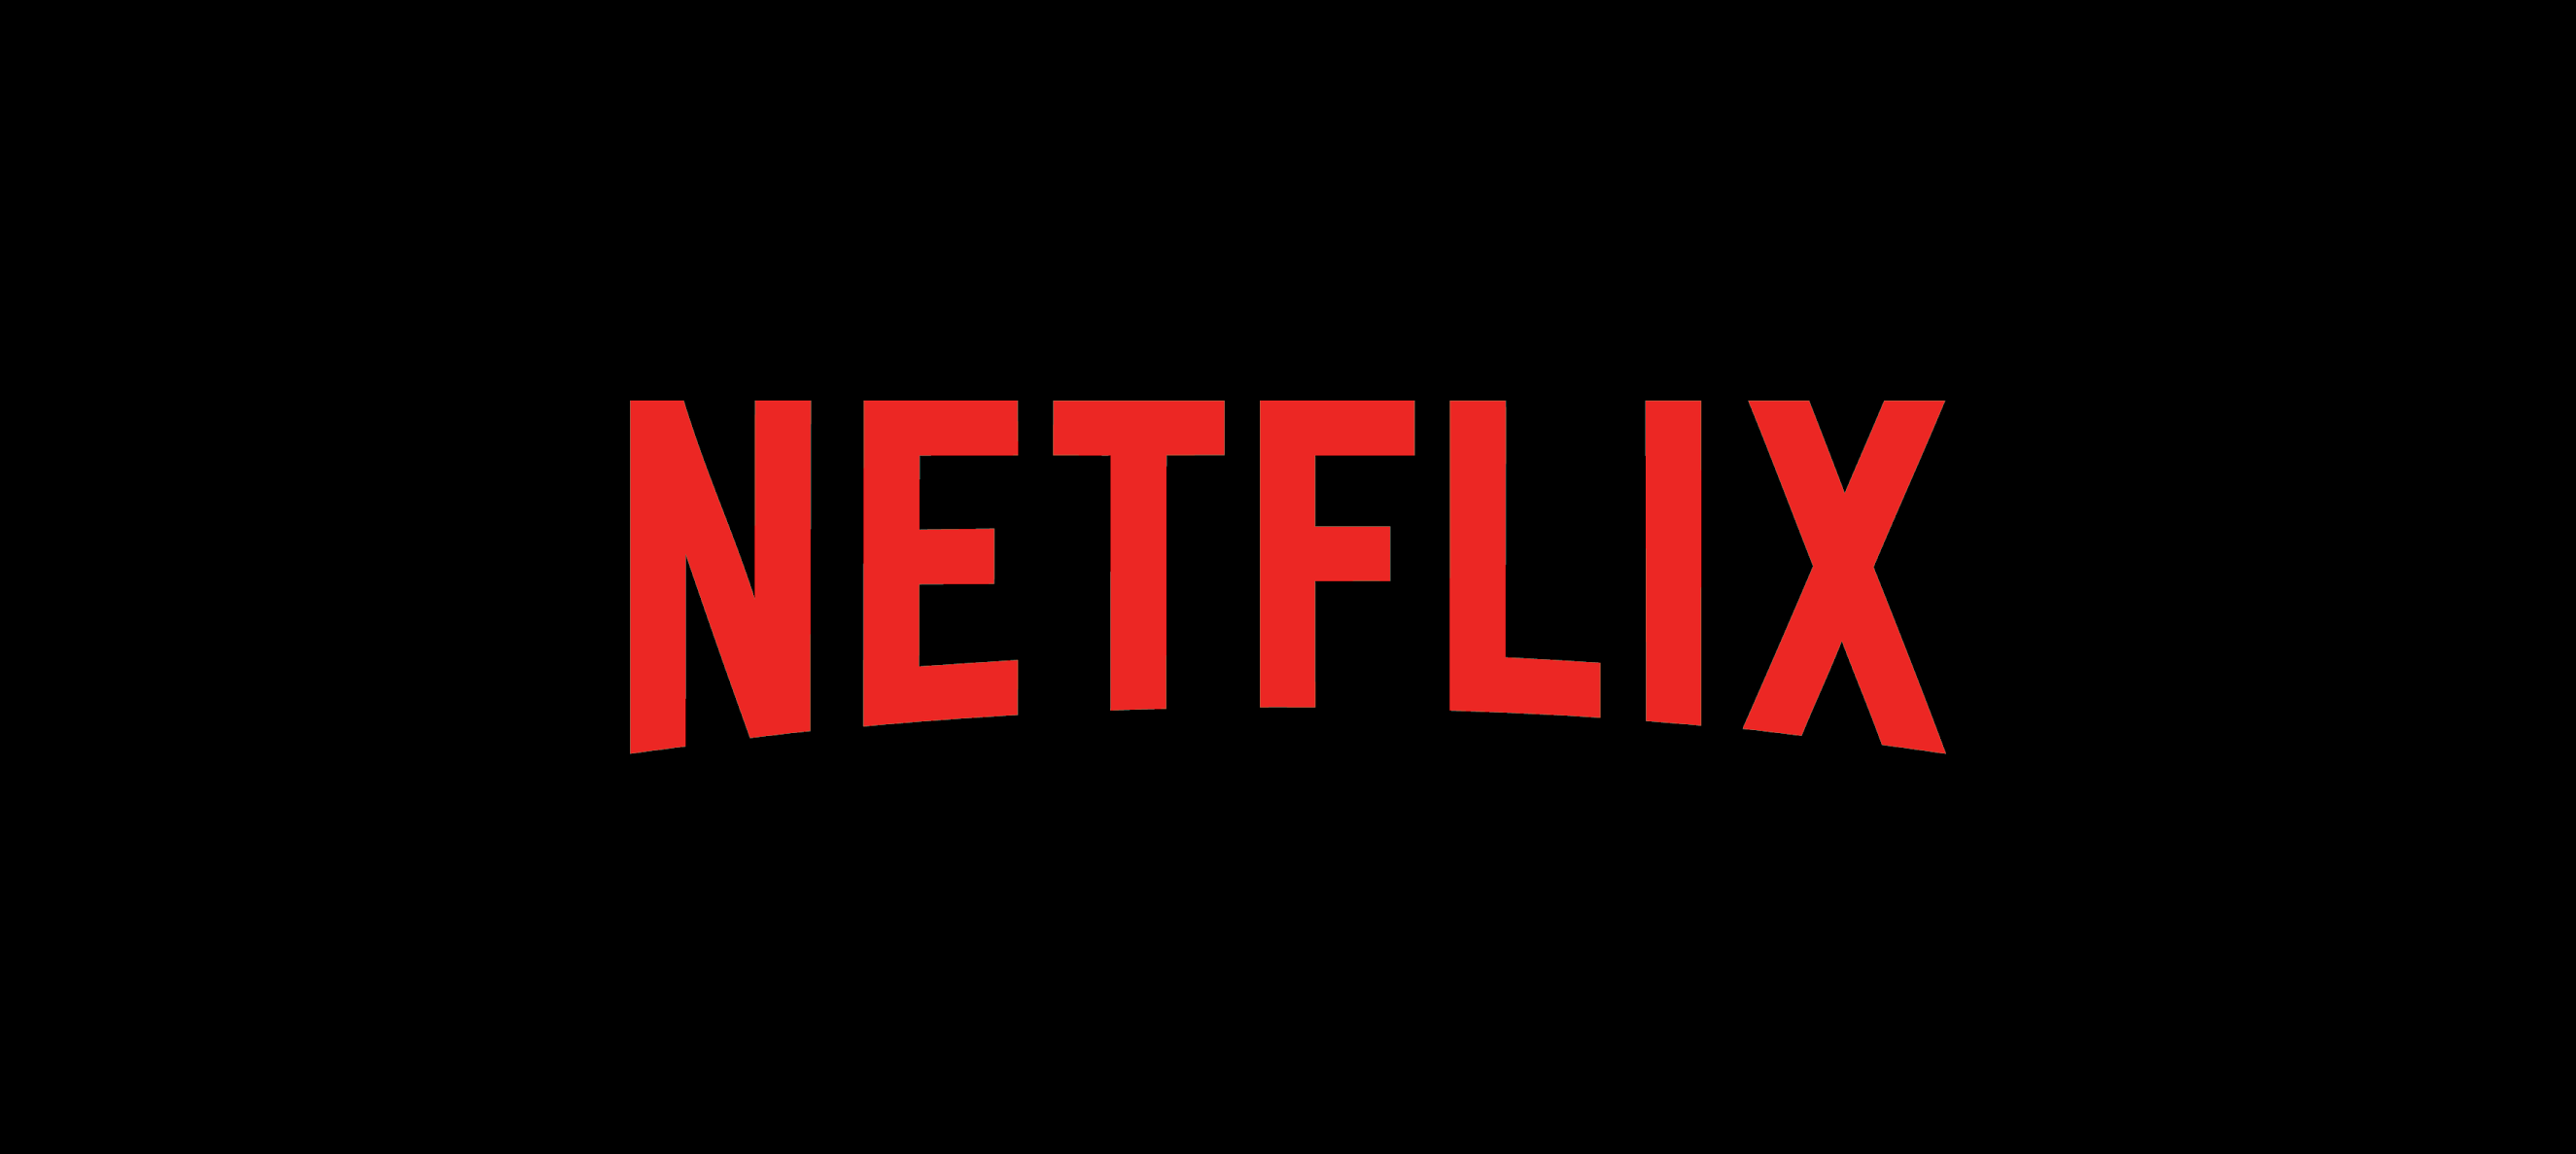 Here's Our Top Recommendations on Netflix's July 2021 Lineup